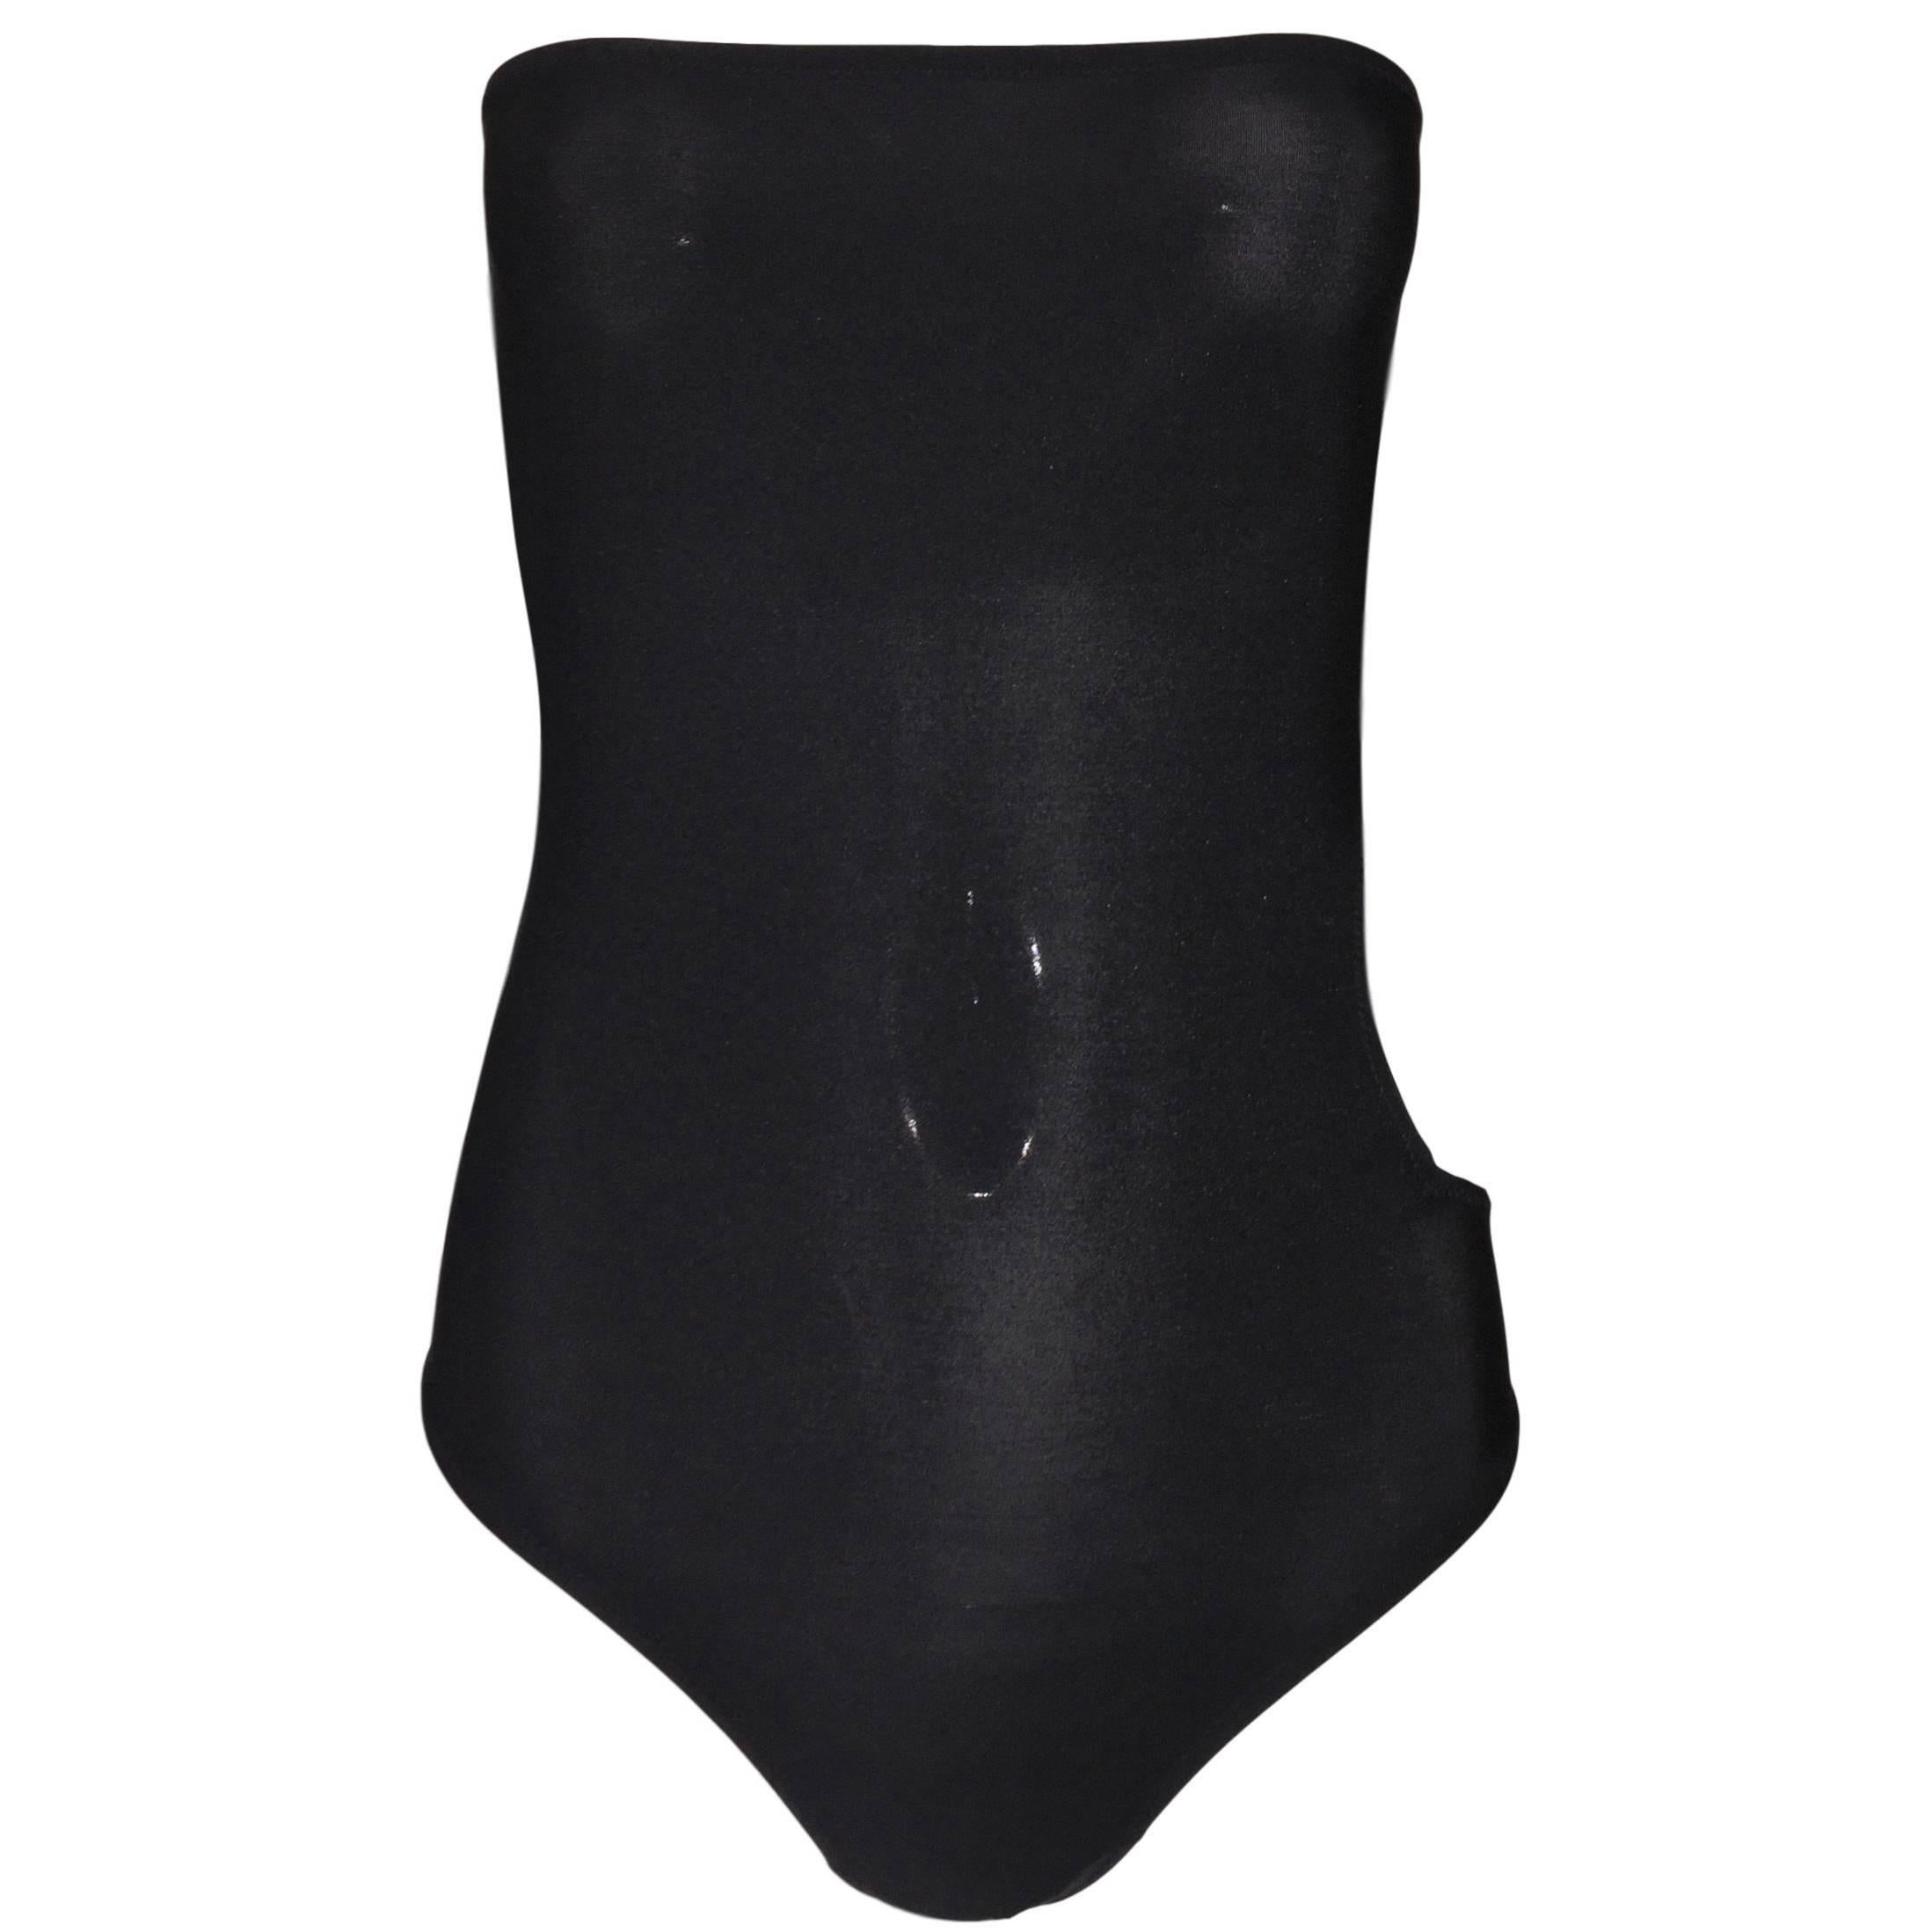 S/S 2001 Gianni Versace Sheer Black Strapless Cut-Out Bodysuit Swimsuit